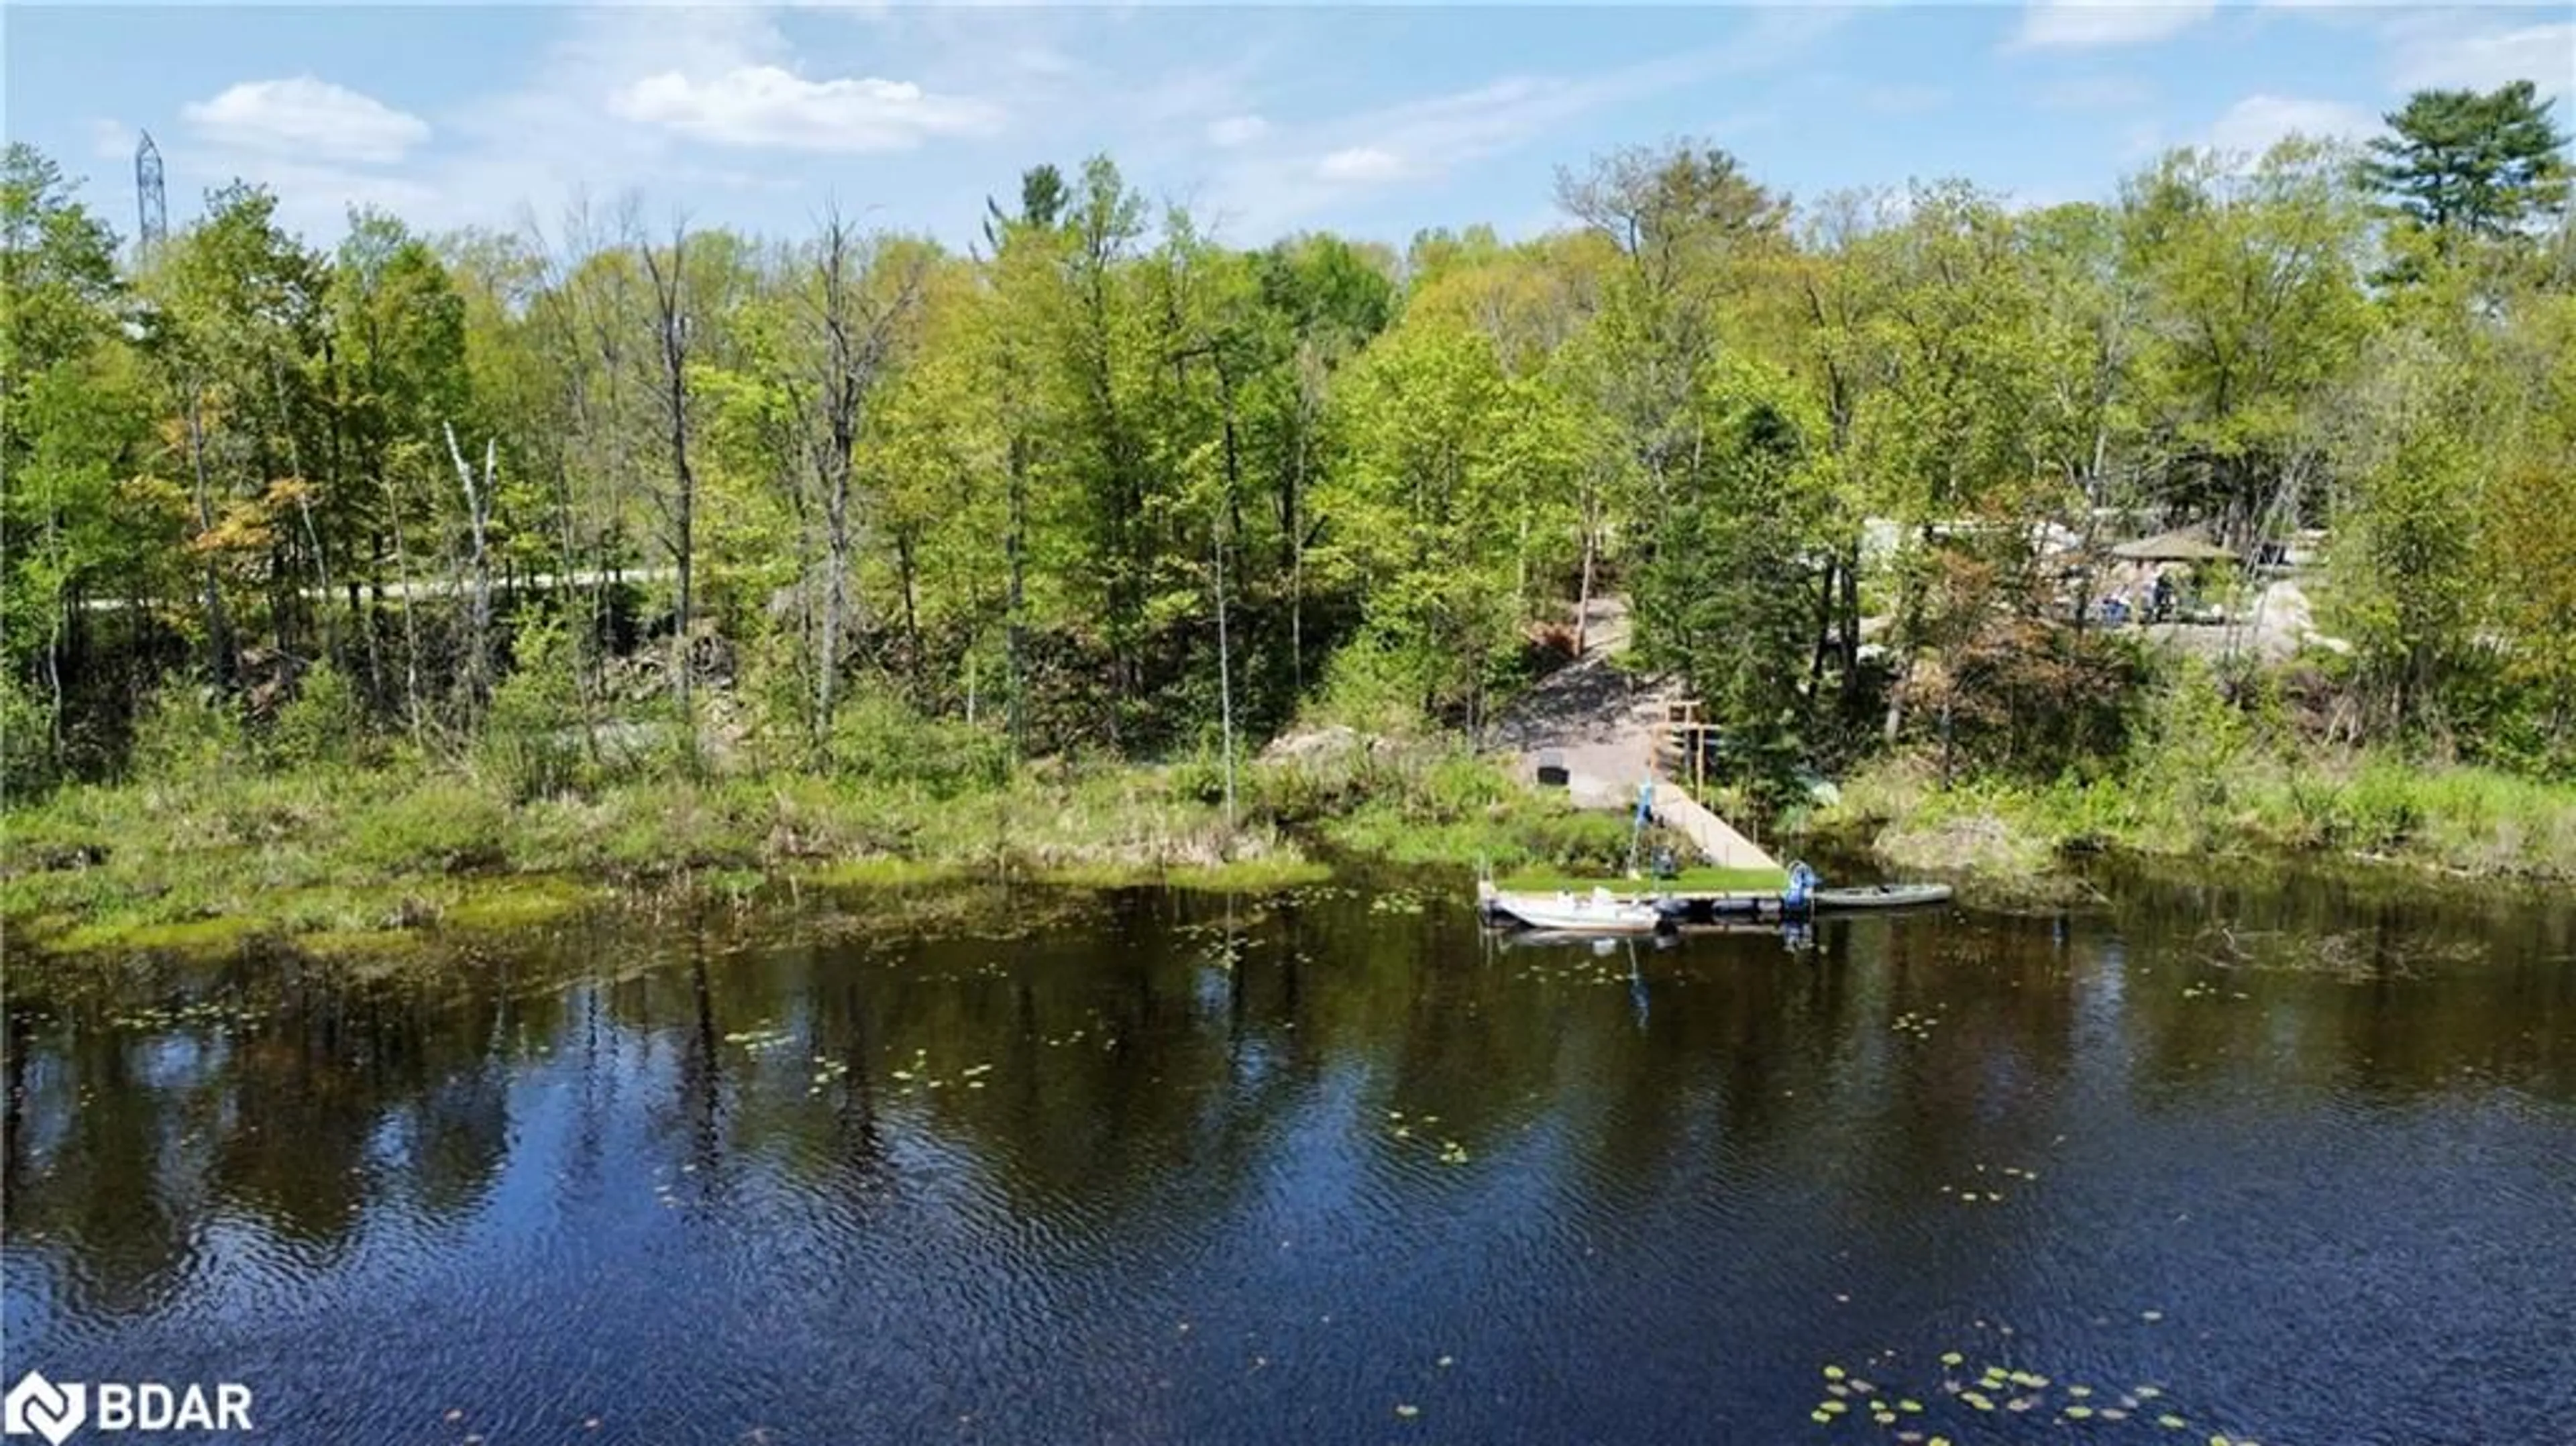 Lakeview for 2699 Coopers Falls Road, Washago Ontario L0K 2B0